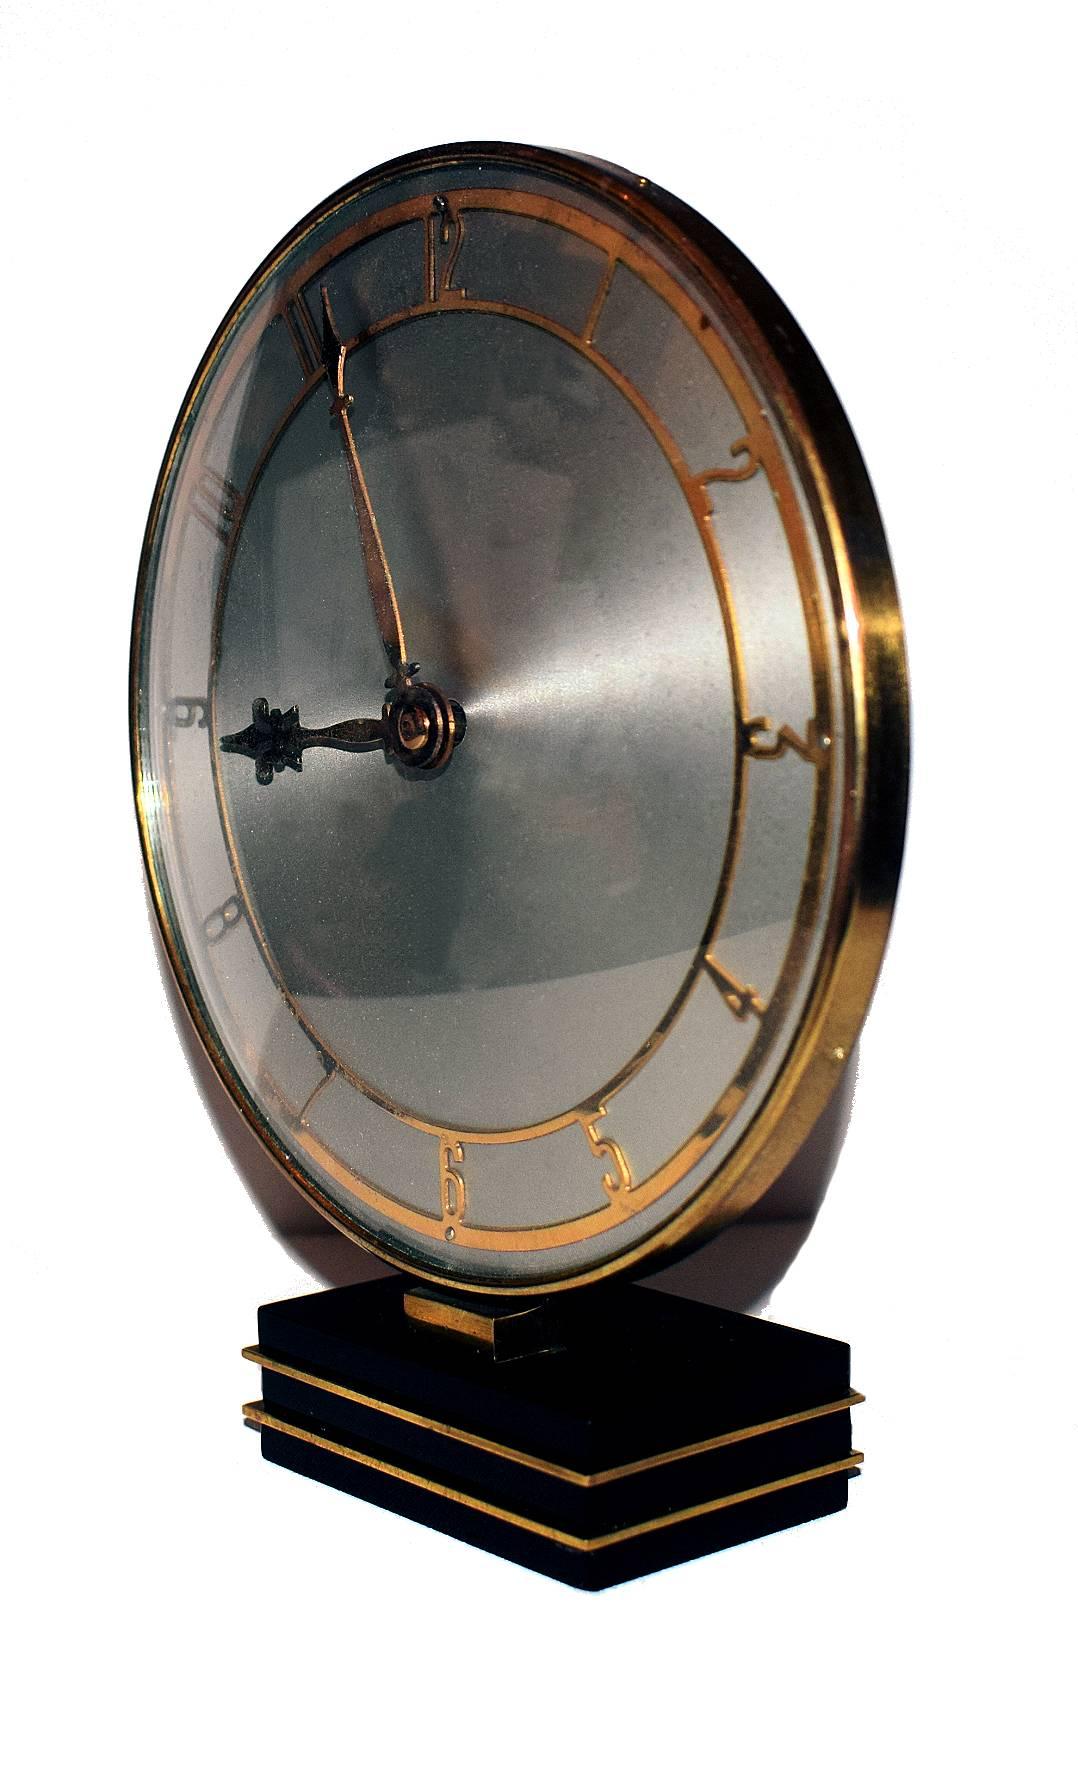 Very attractive modernist English wind up movement clock. Brass chapter ring and a silvered dial makes the back drop to the gold tone metal chapter ring and numerals. The whole clock sits on a black and gold tone celluloid base. Keeps good time